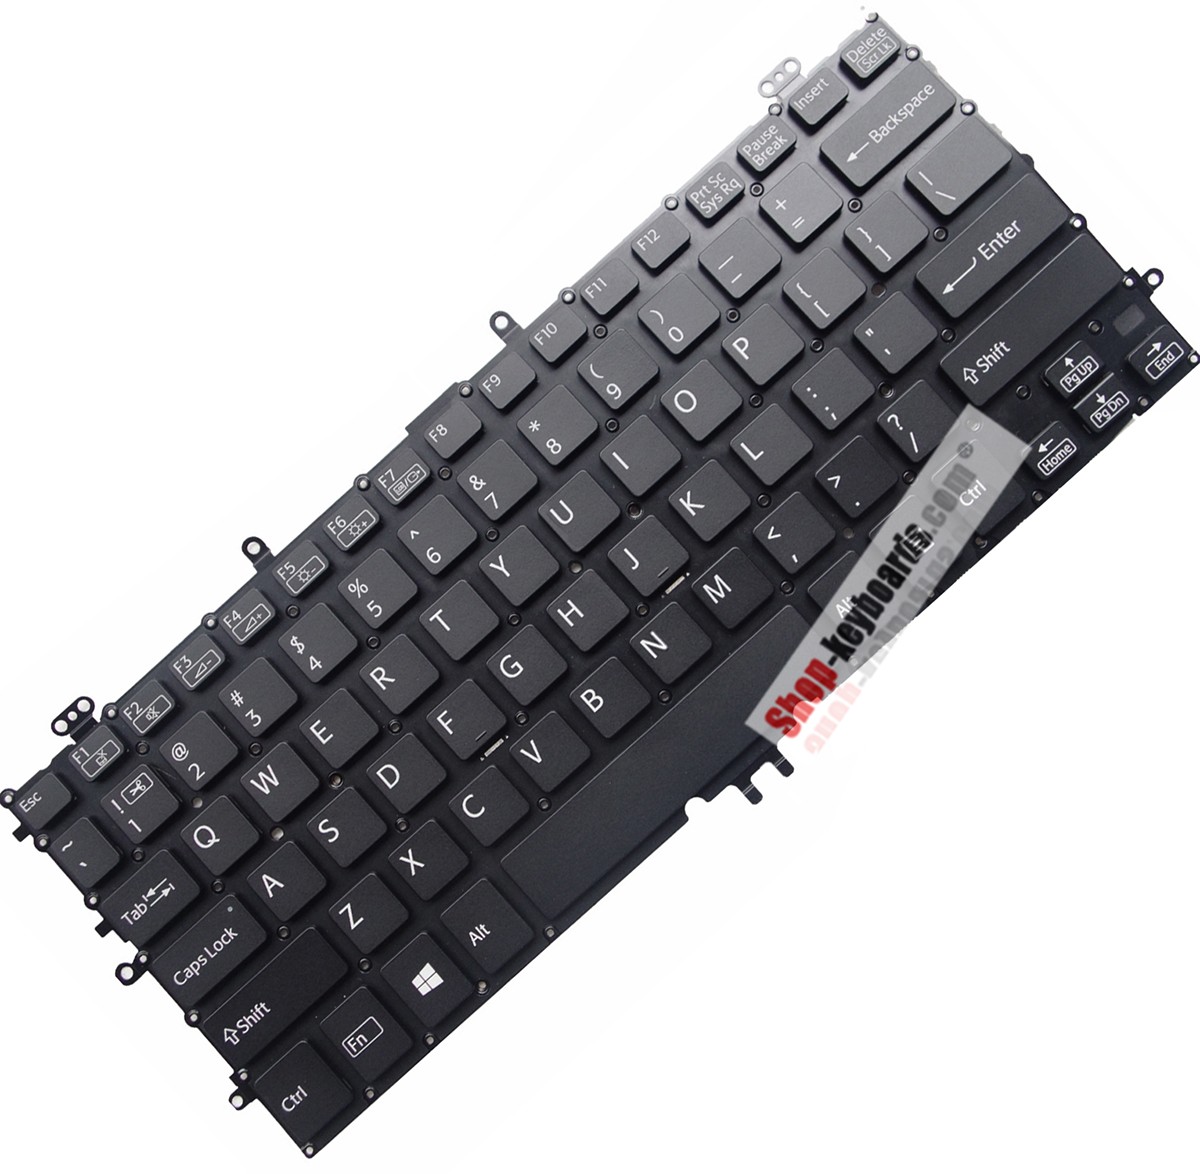 Sony VAIO SVF11N1L2EB  Keyboard replacement